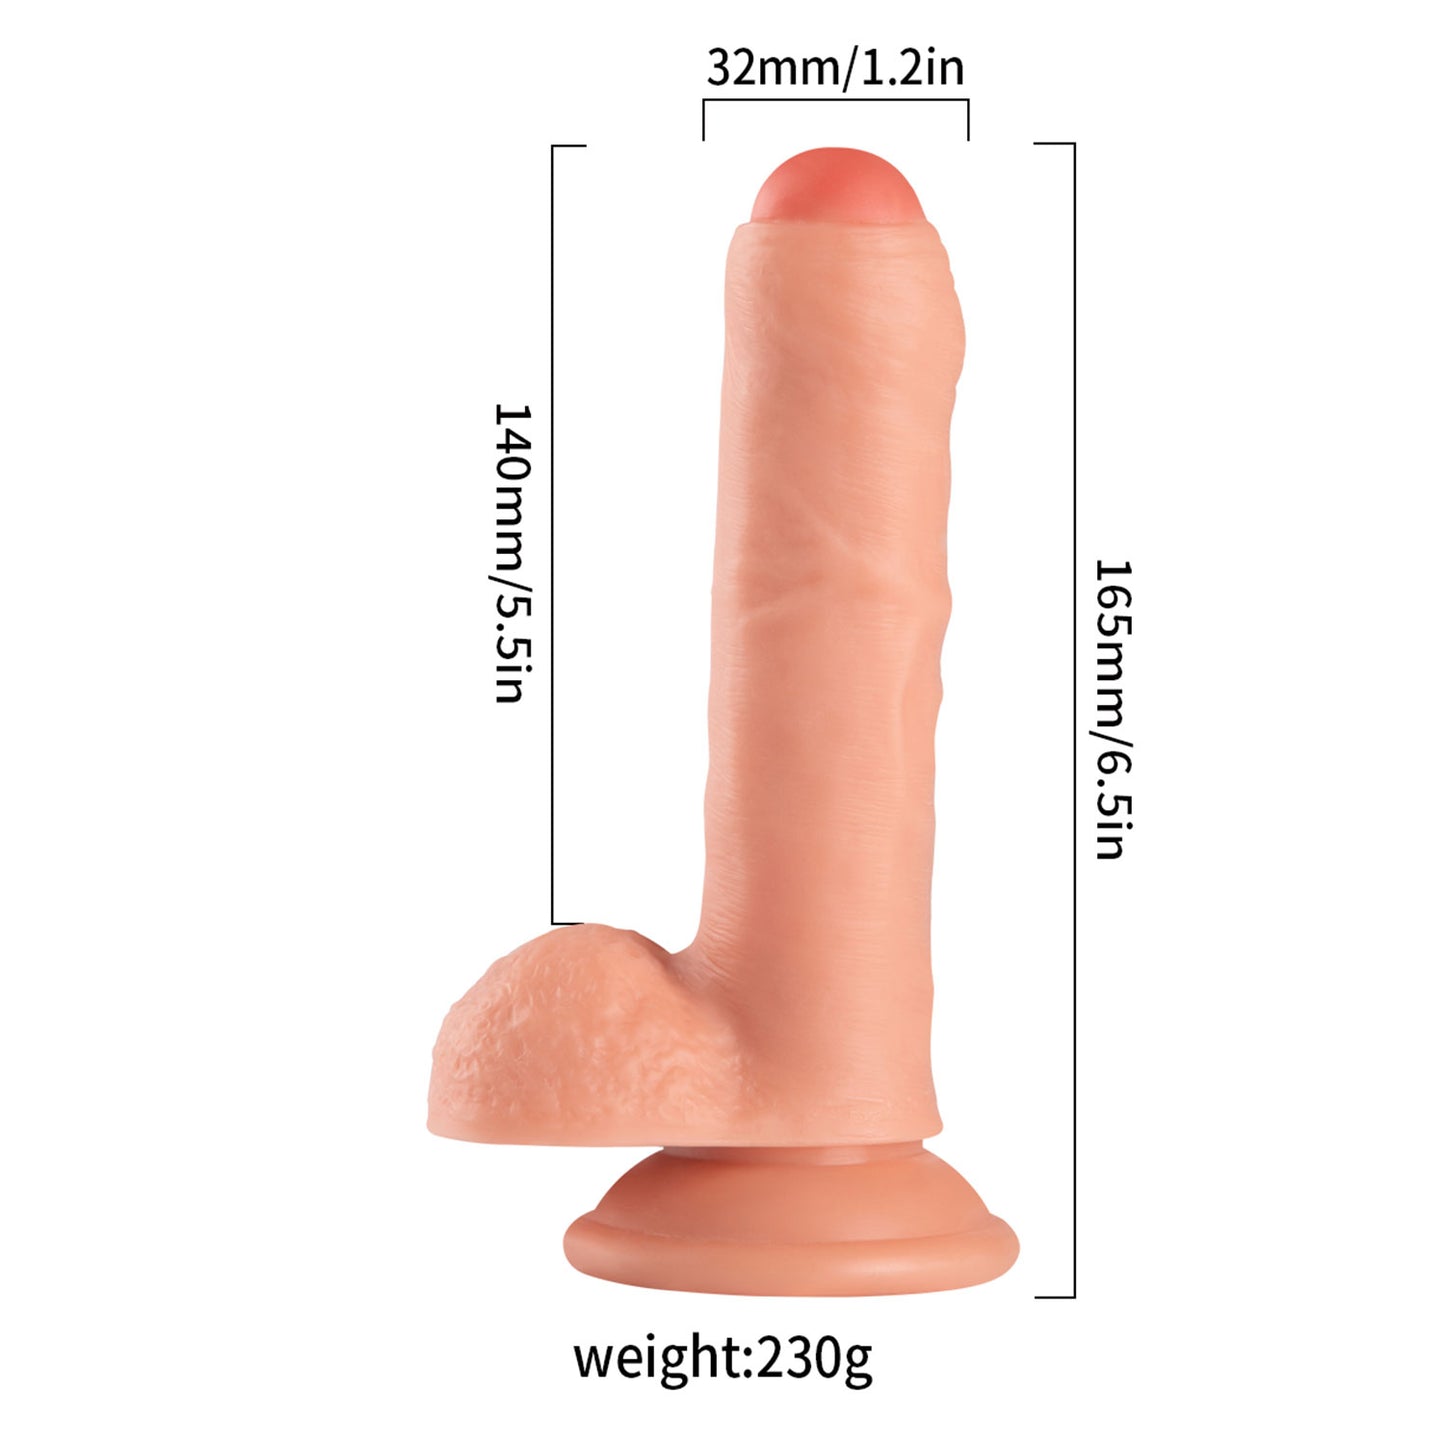 The Horny Company - No Frills Dildo 16.5cm x 3.2cm Uncut Suction Cup Dong